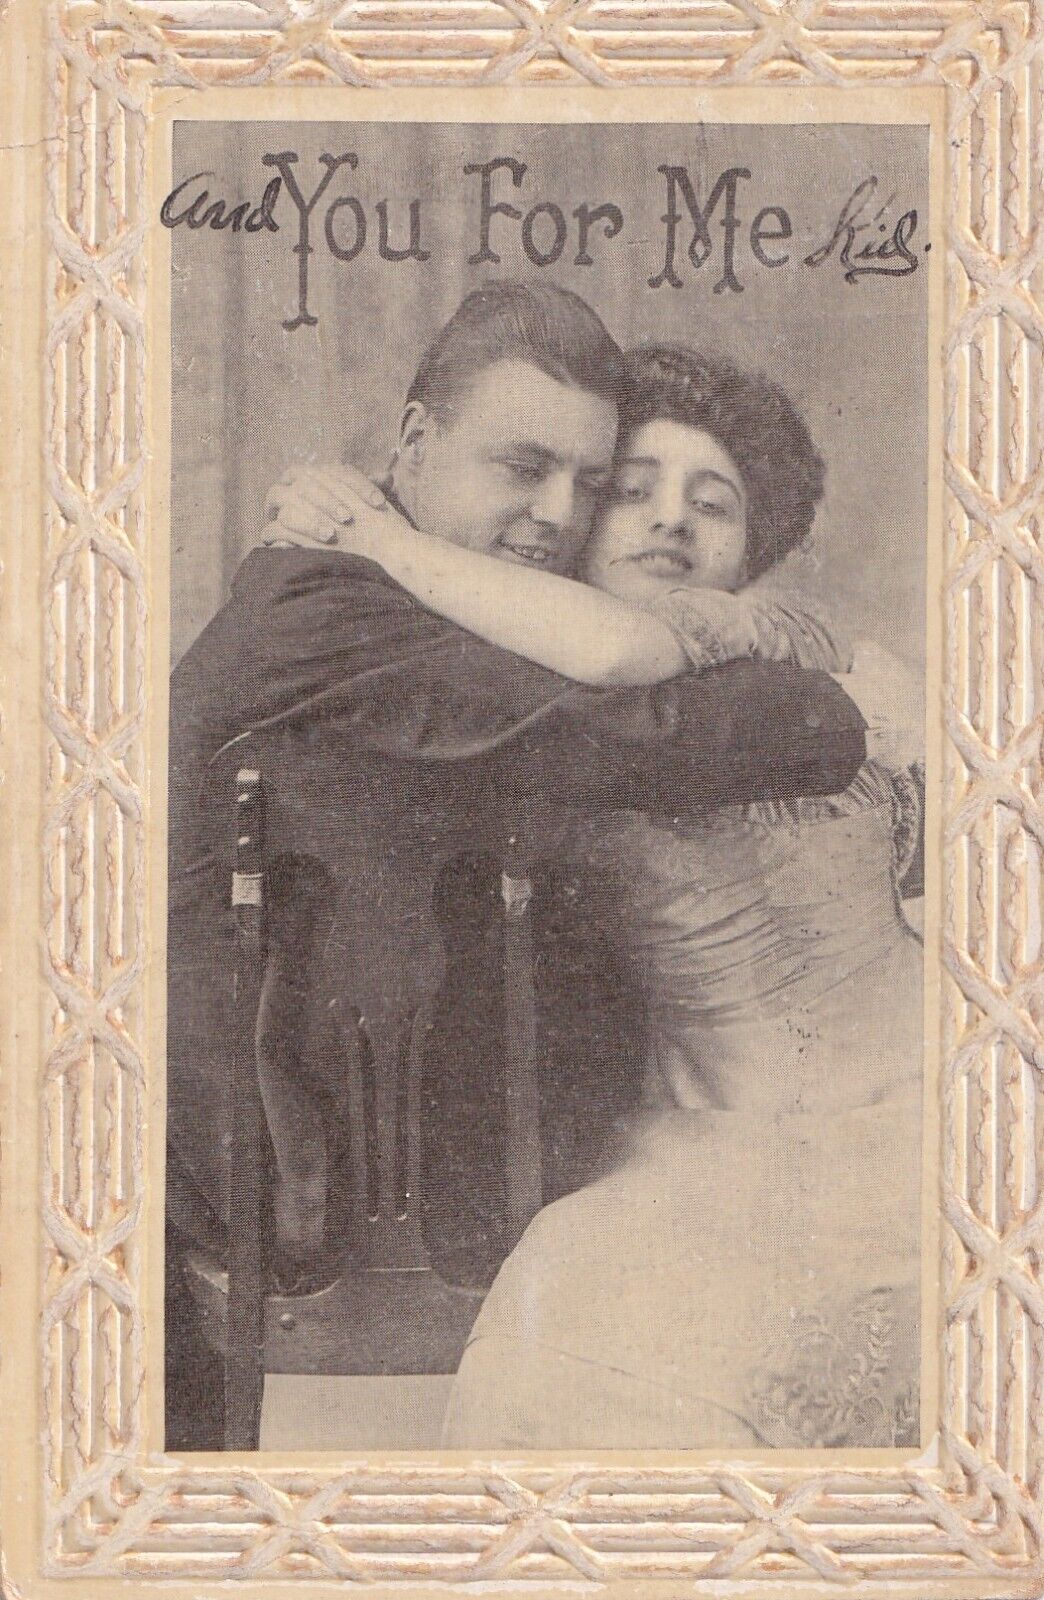 Antique Victorian Postcard Greeting Card Love And You For Me Kid Couple 1900s A0